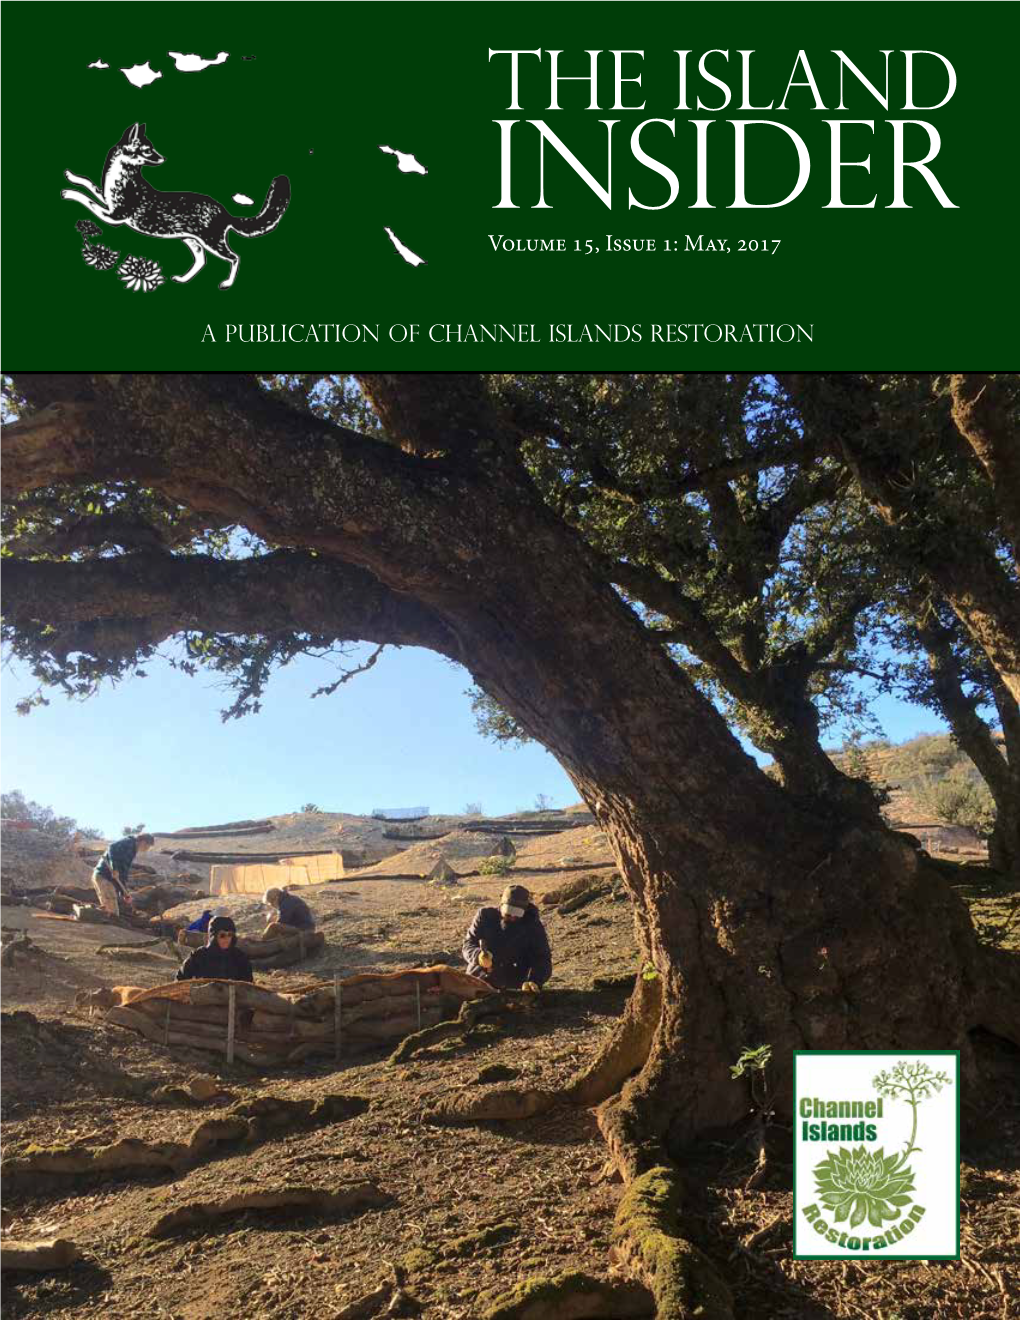 The Island Insider Volume 15, Issue 1: May, 2017